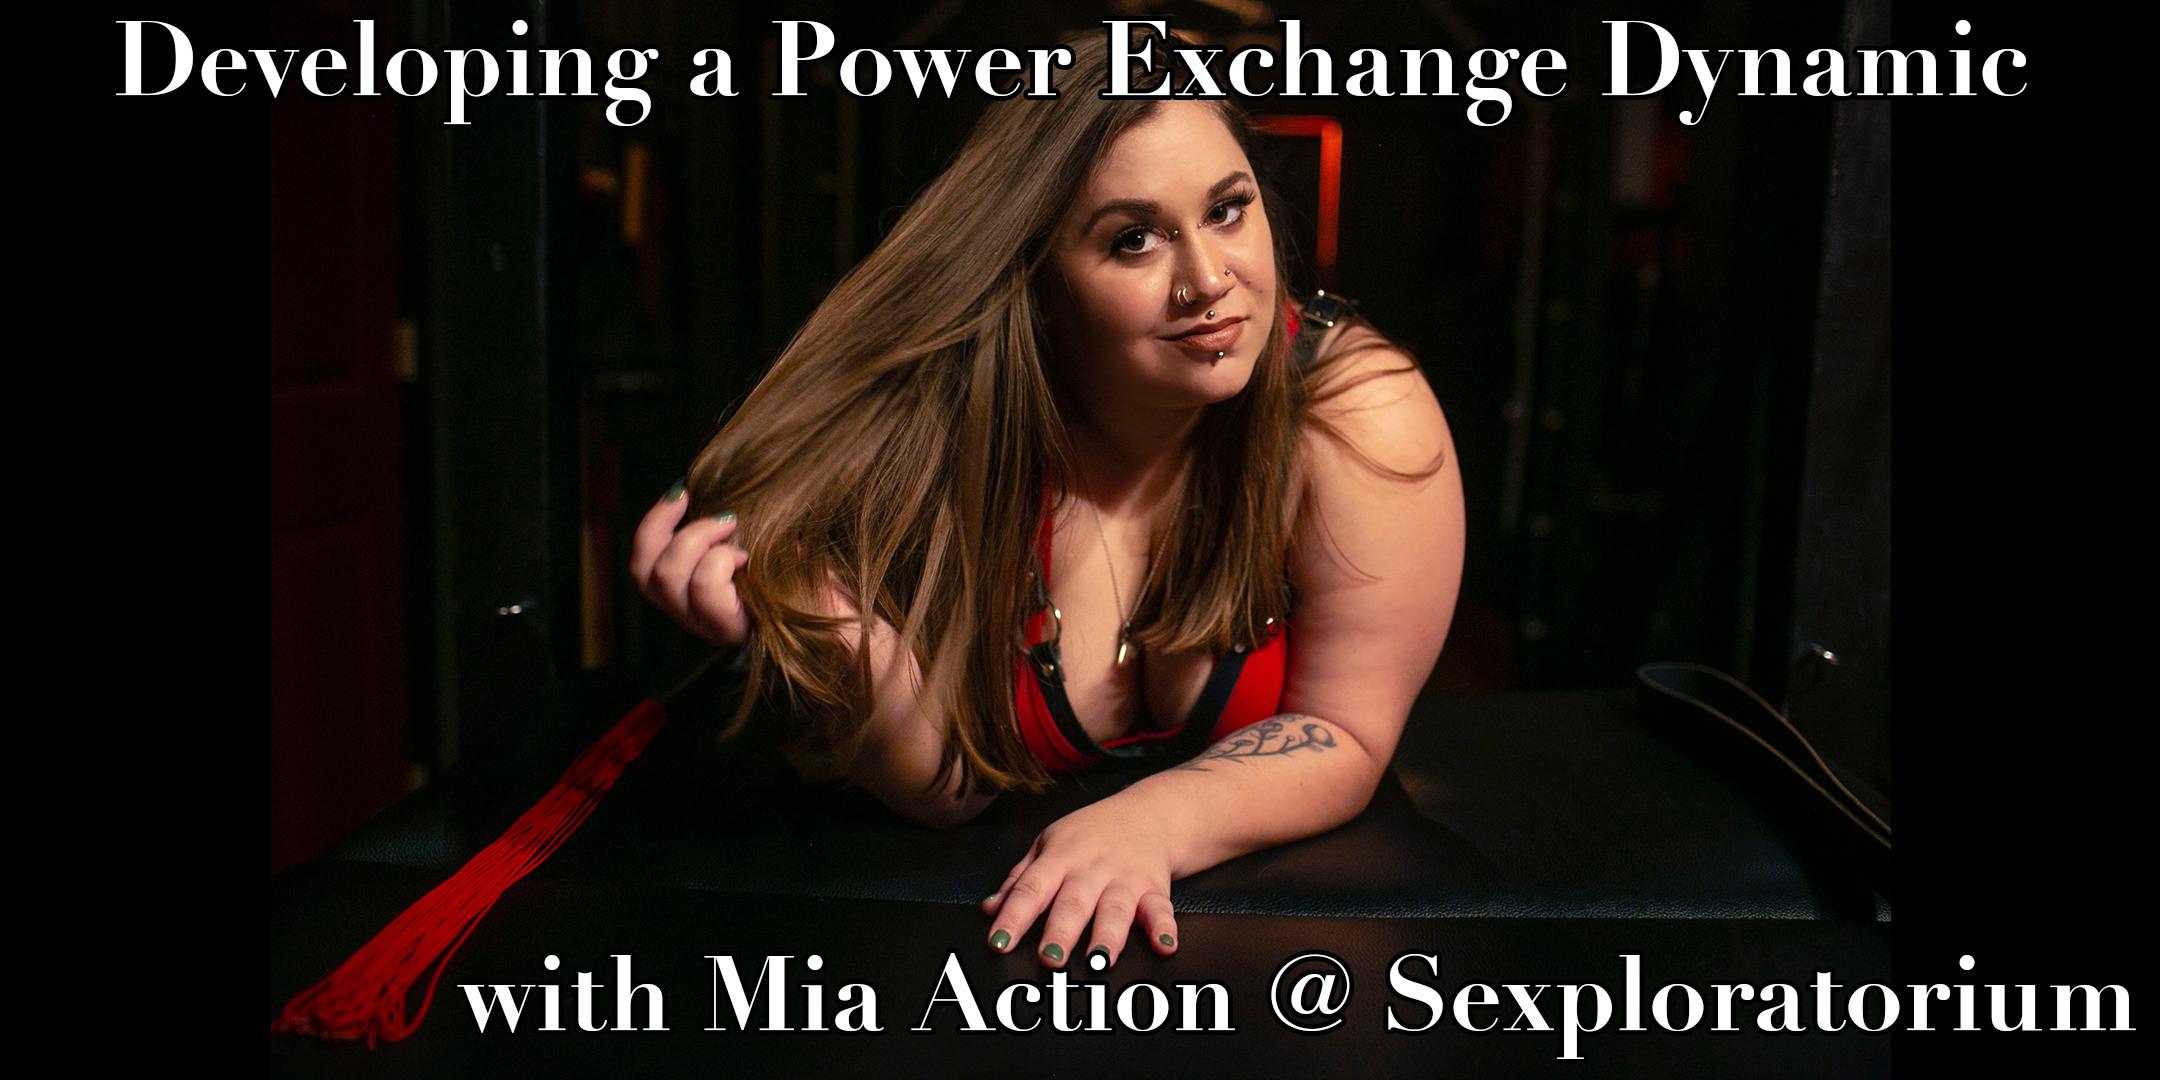 Developing a Power Exchange Dynamic with Mia Action